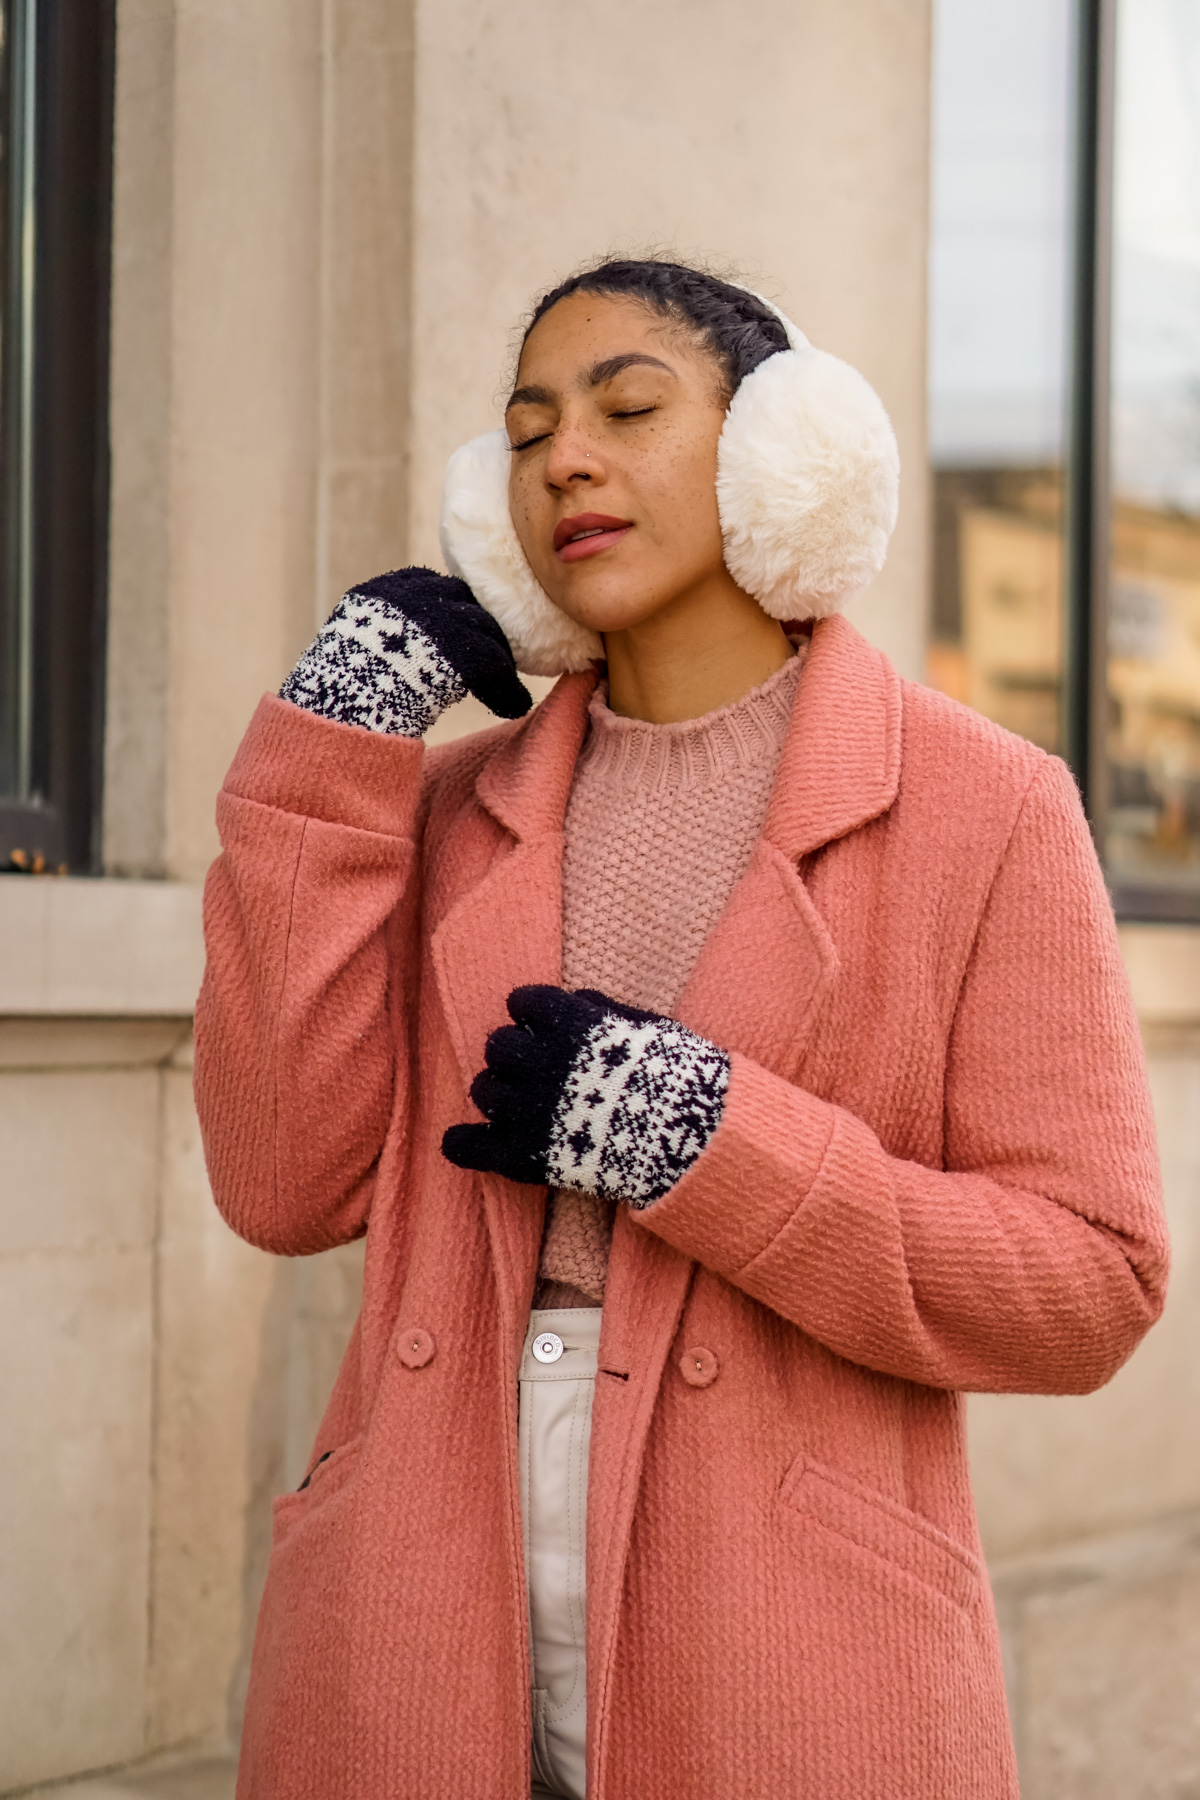 stylish winter accessories for women, chic winter outfit idea black girl, winter accessories hats, black girl fashion blogger, winter accessories gloves